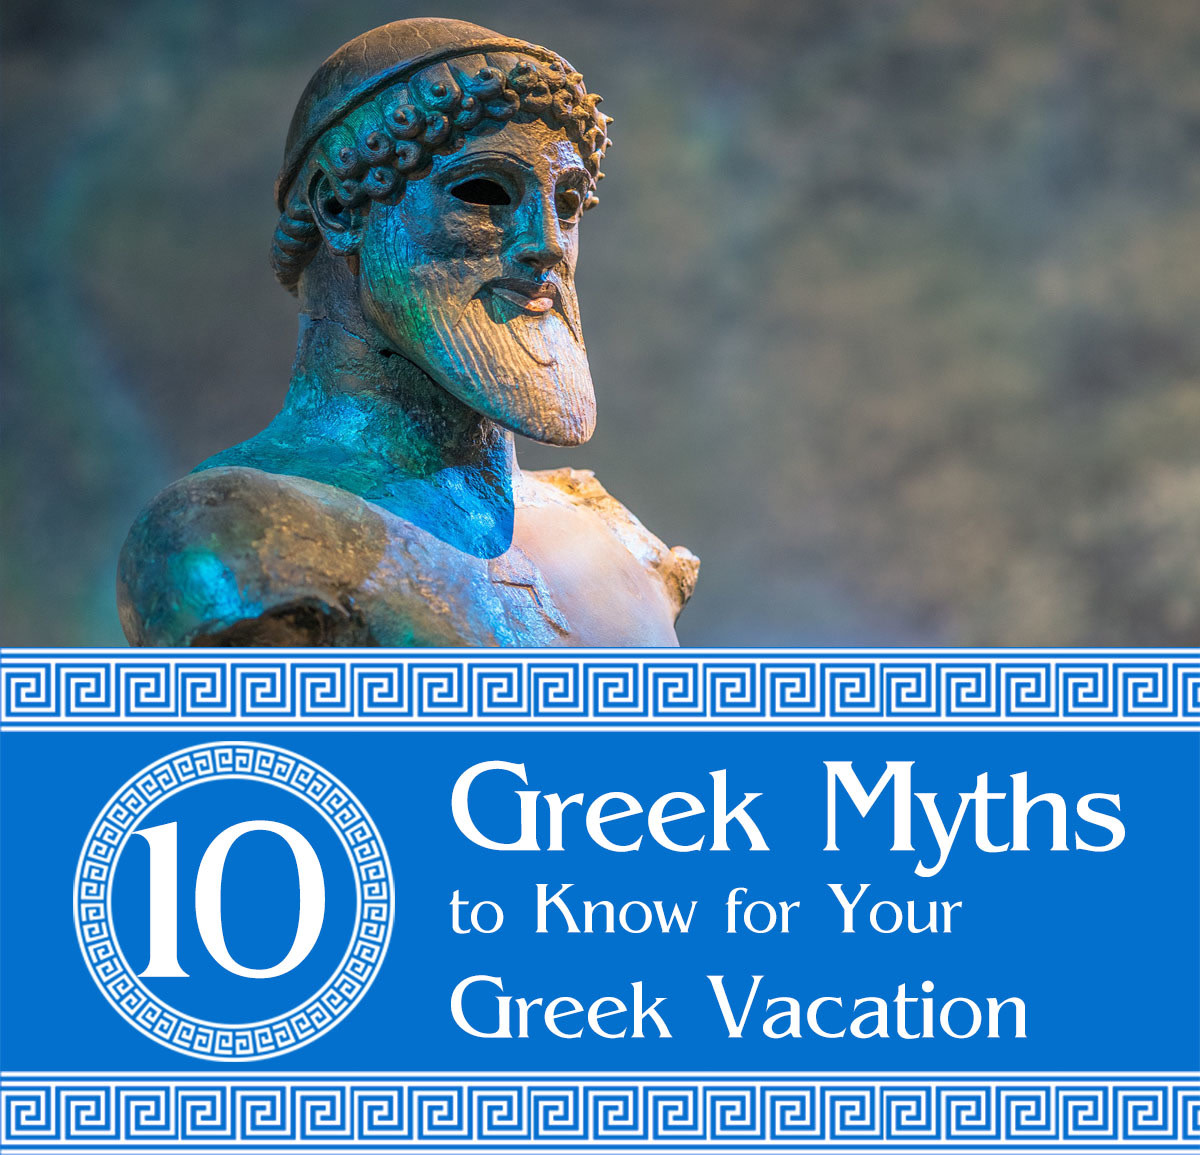 10 Greek Myths to Know for Your Greek Vacation